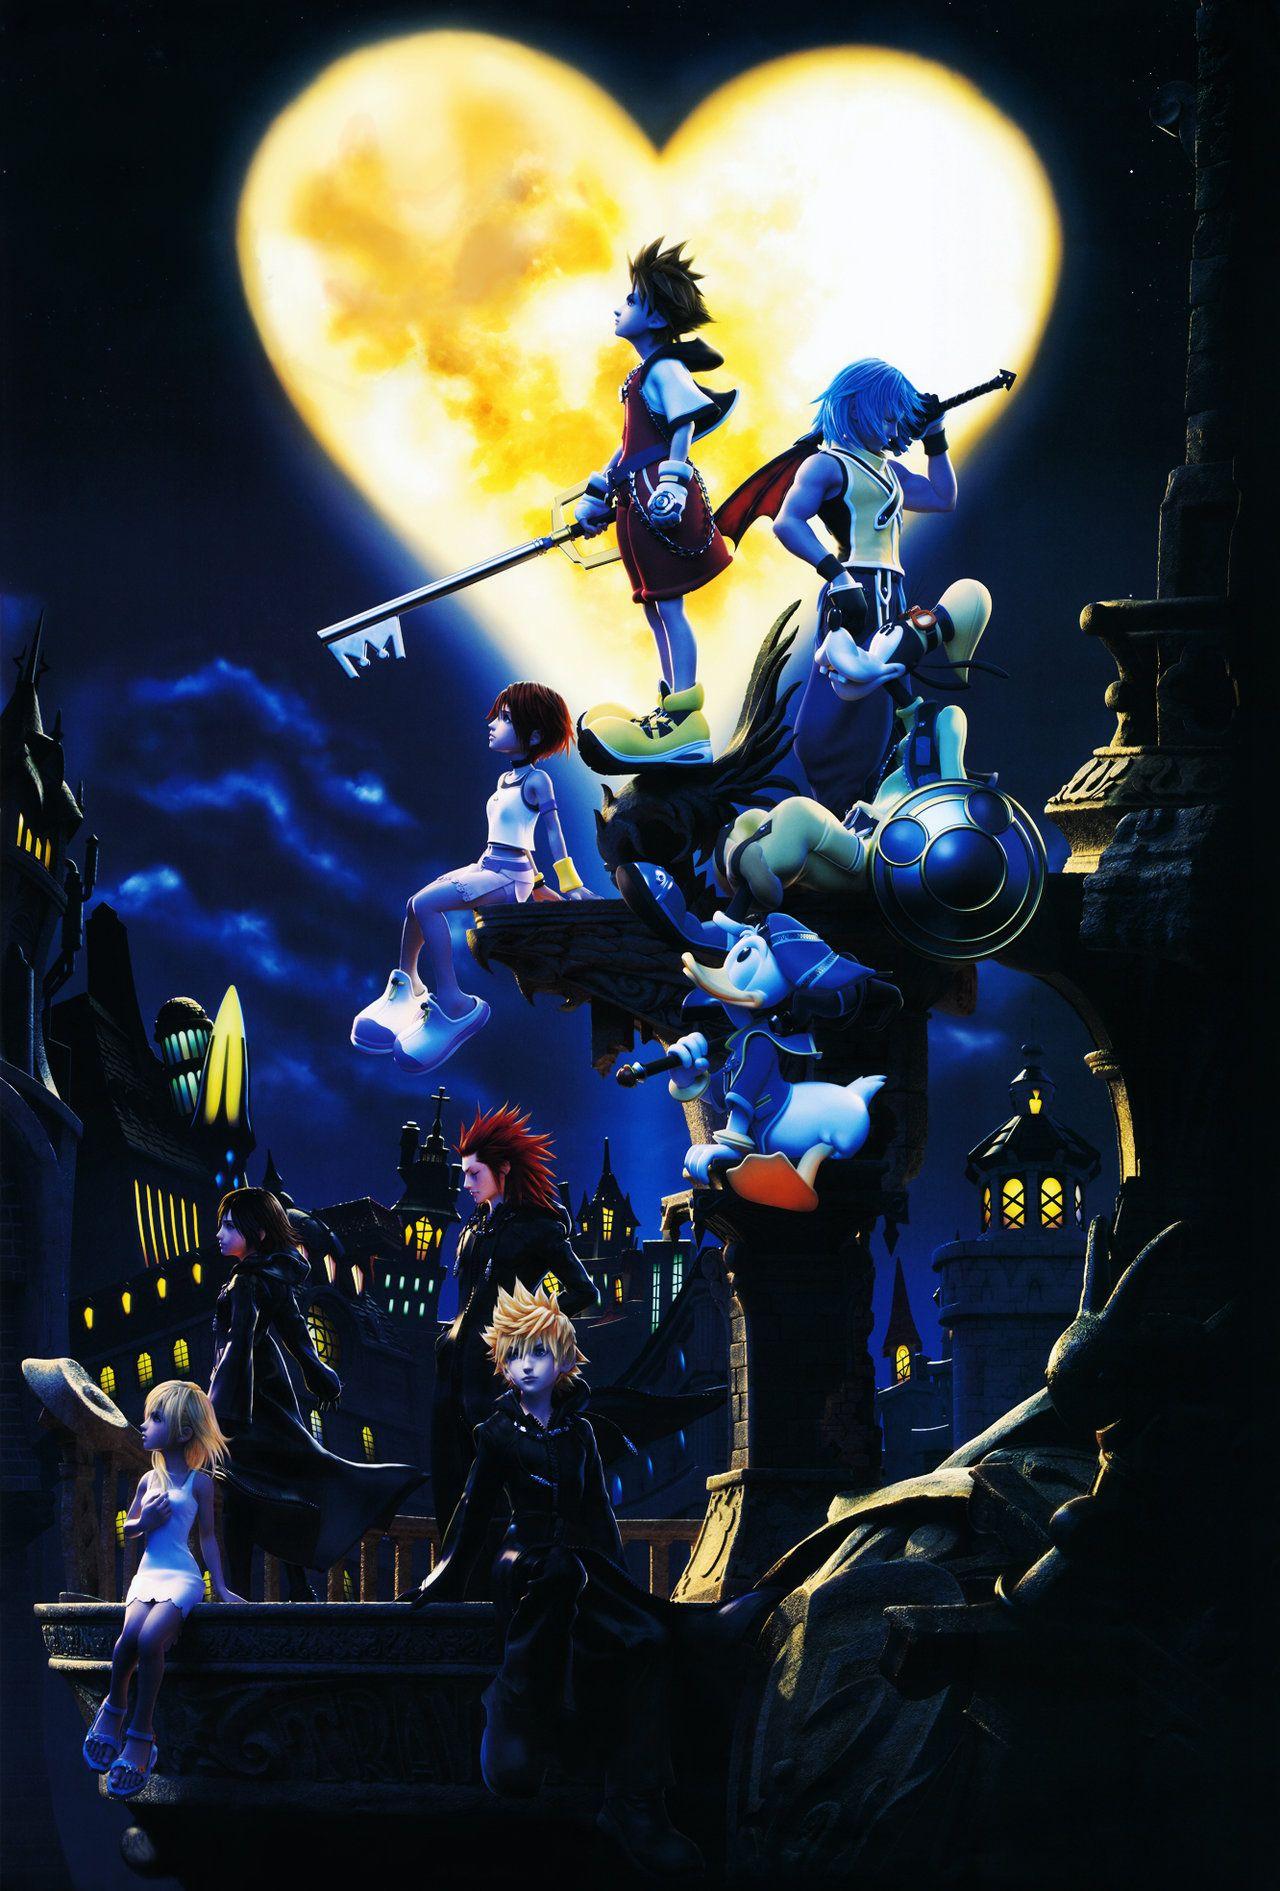 Kingdom Hearts 1 Wallpapers Top Free Kingdom Hearts 1 Backgrounds Wallpaperaccess